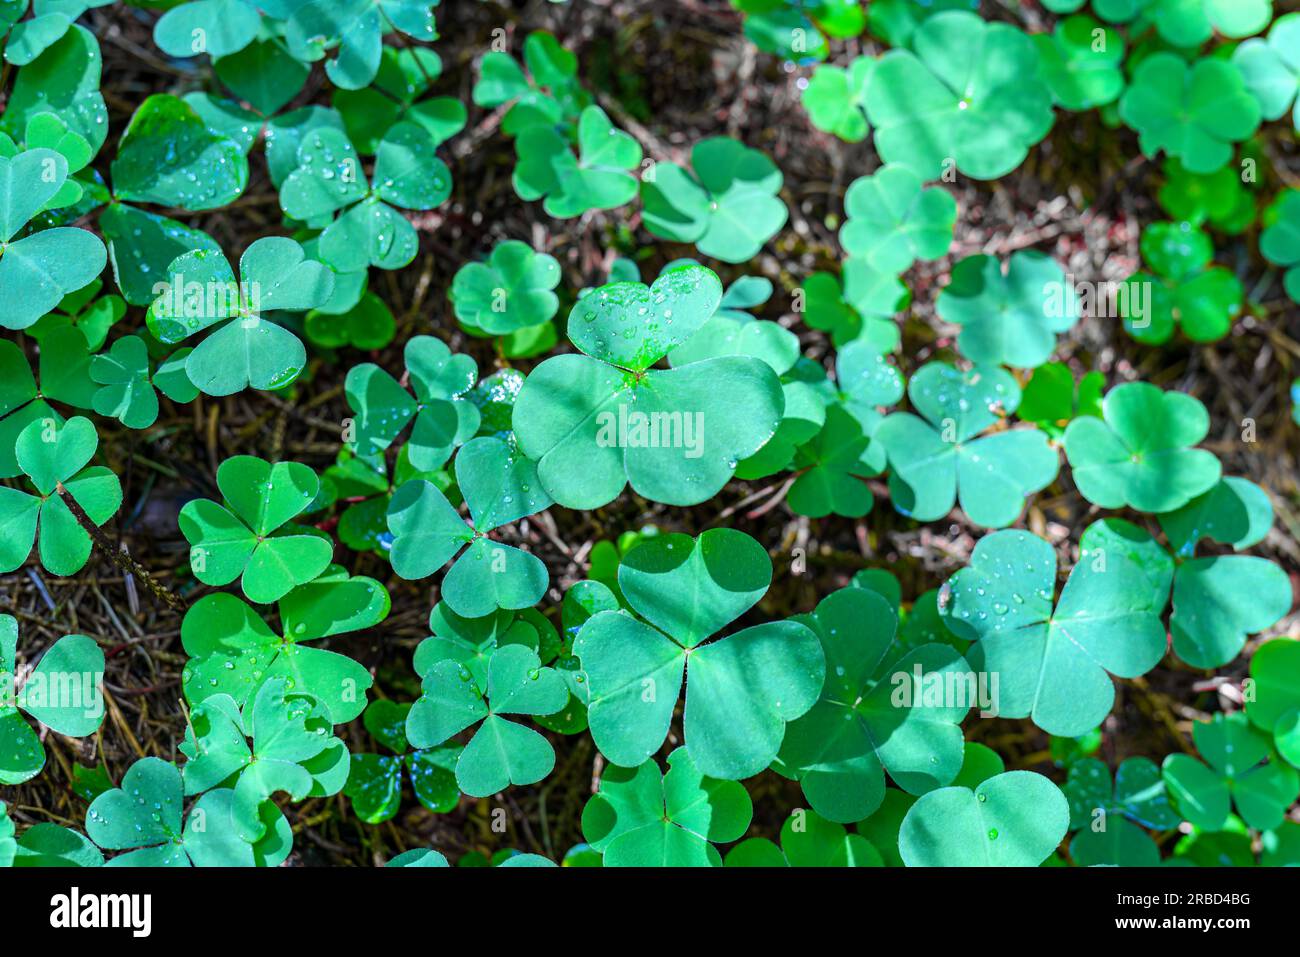 Green clover leaf isolated on dark background. with three-leaved shamrocks. St. Patrick's day holiday symbol. Stock Photo